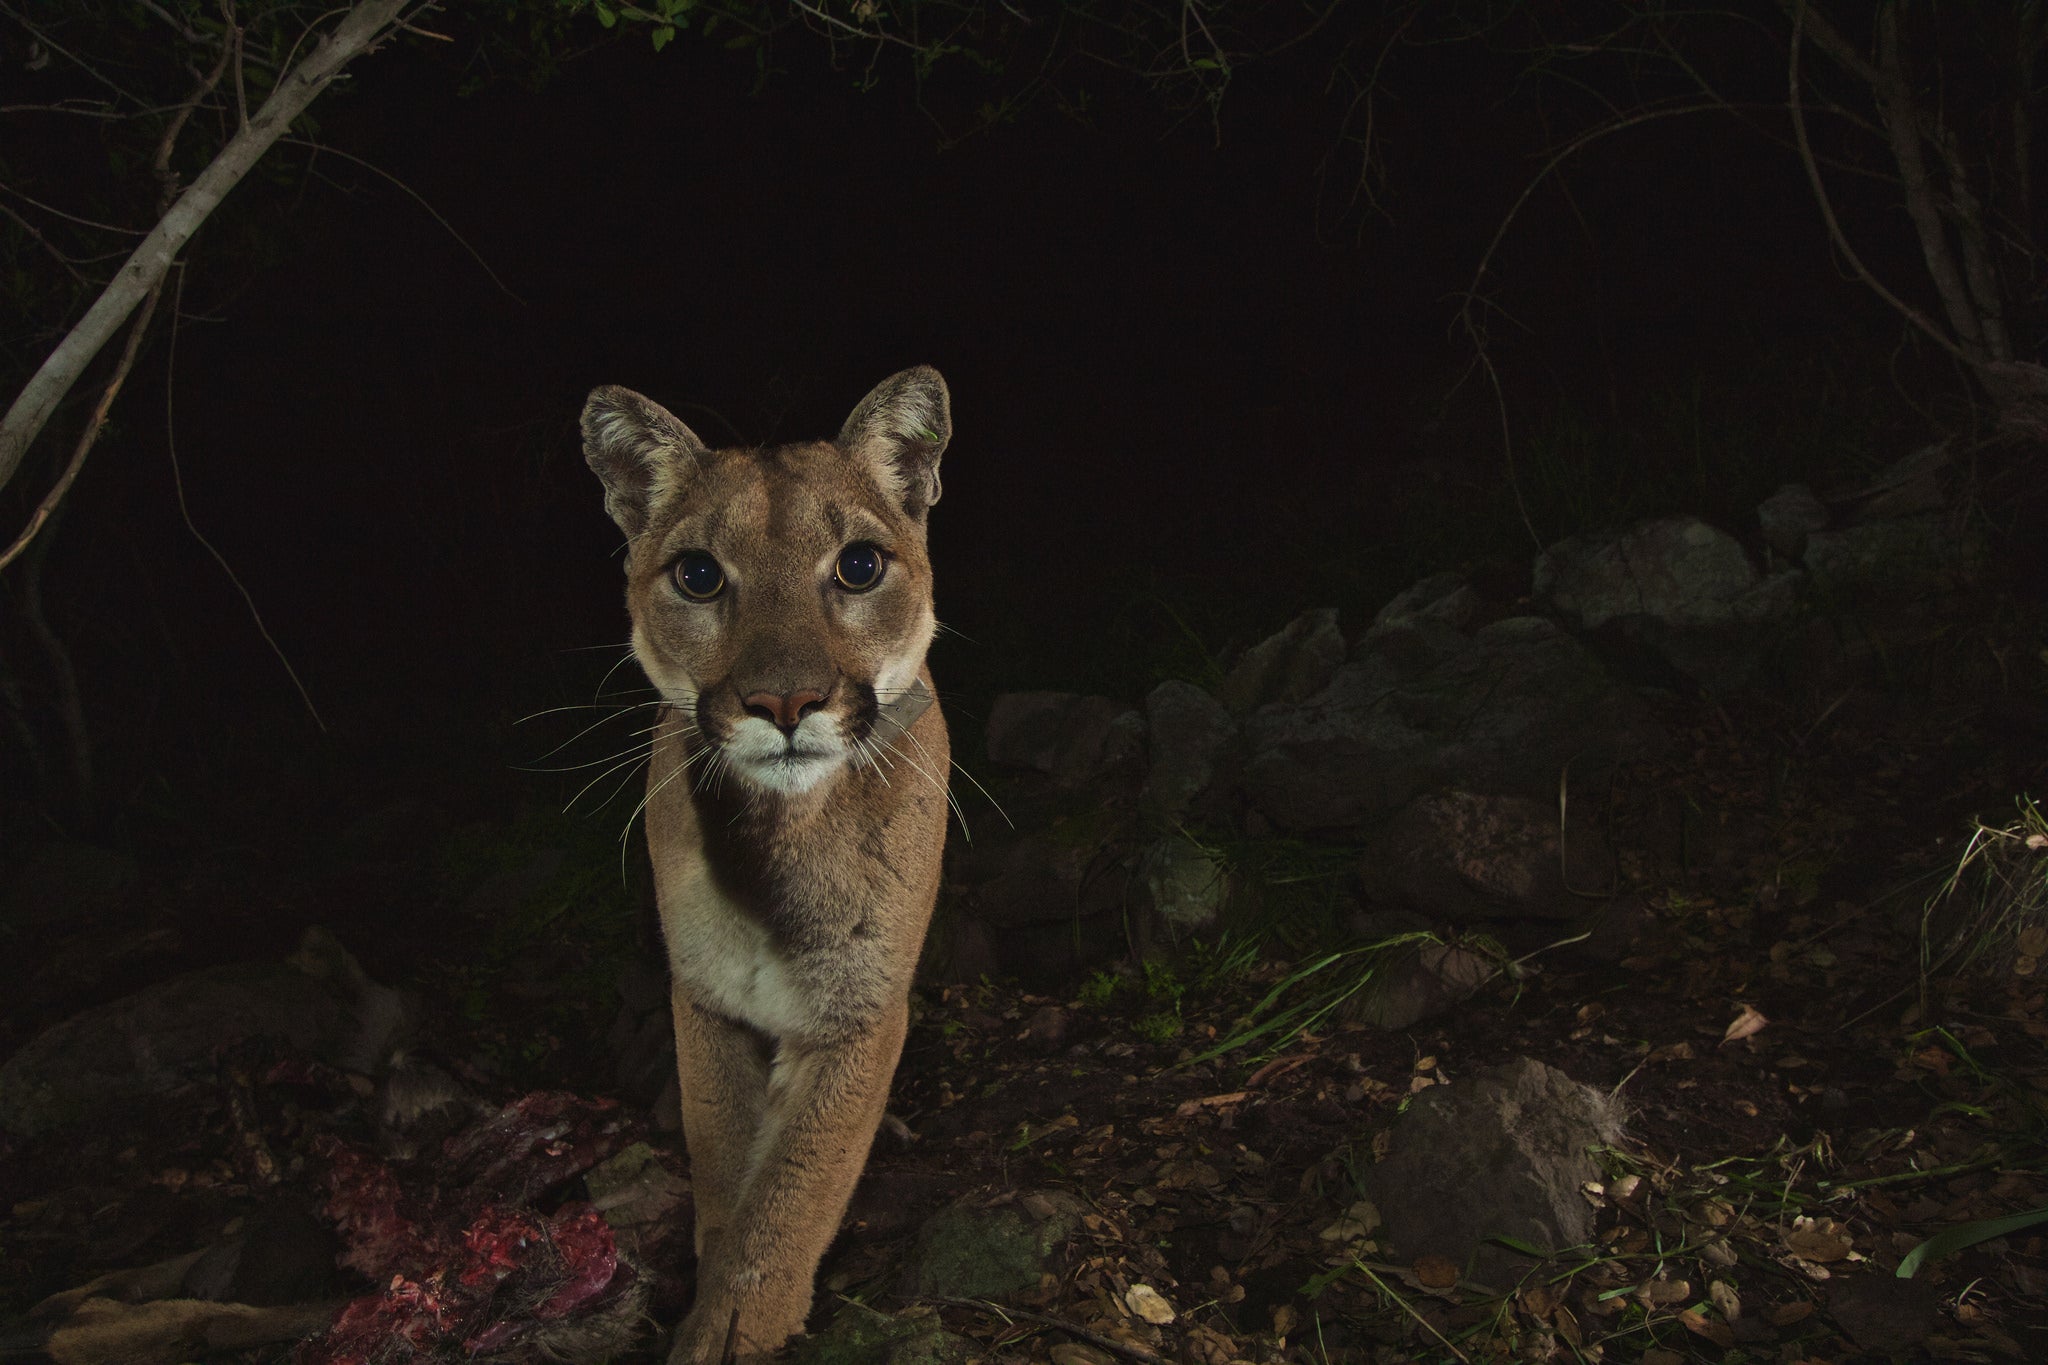 female mountain lion stares at camera while walking in dark woods